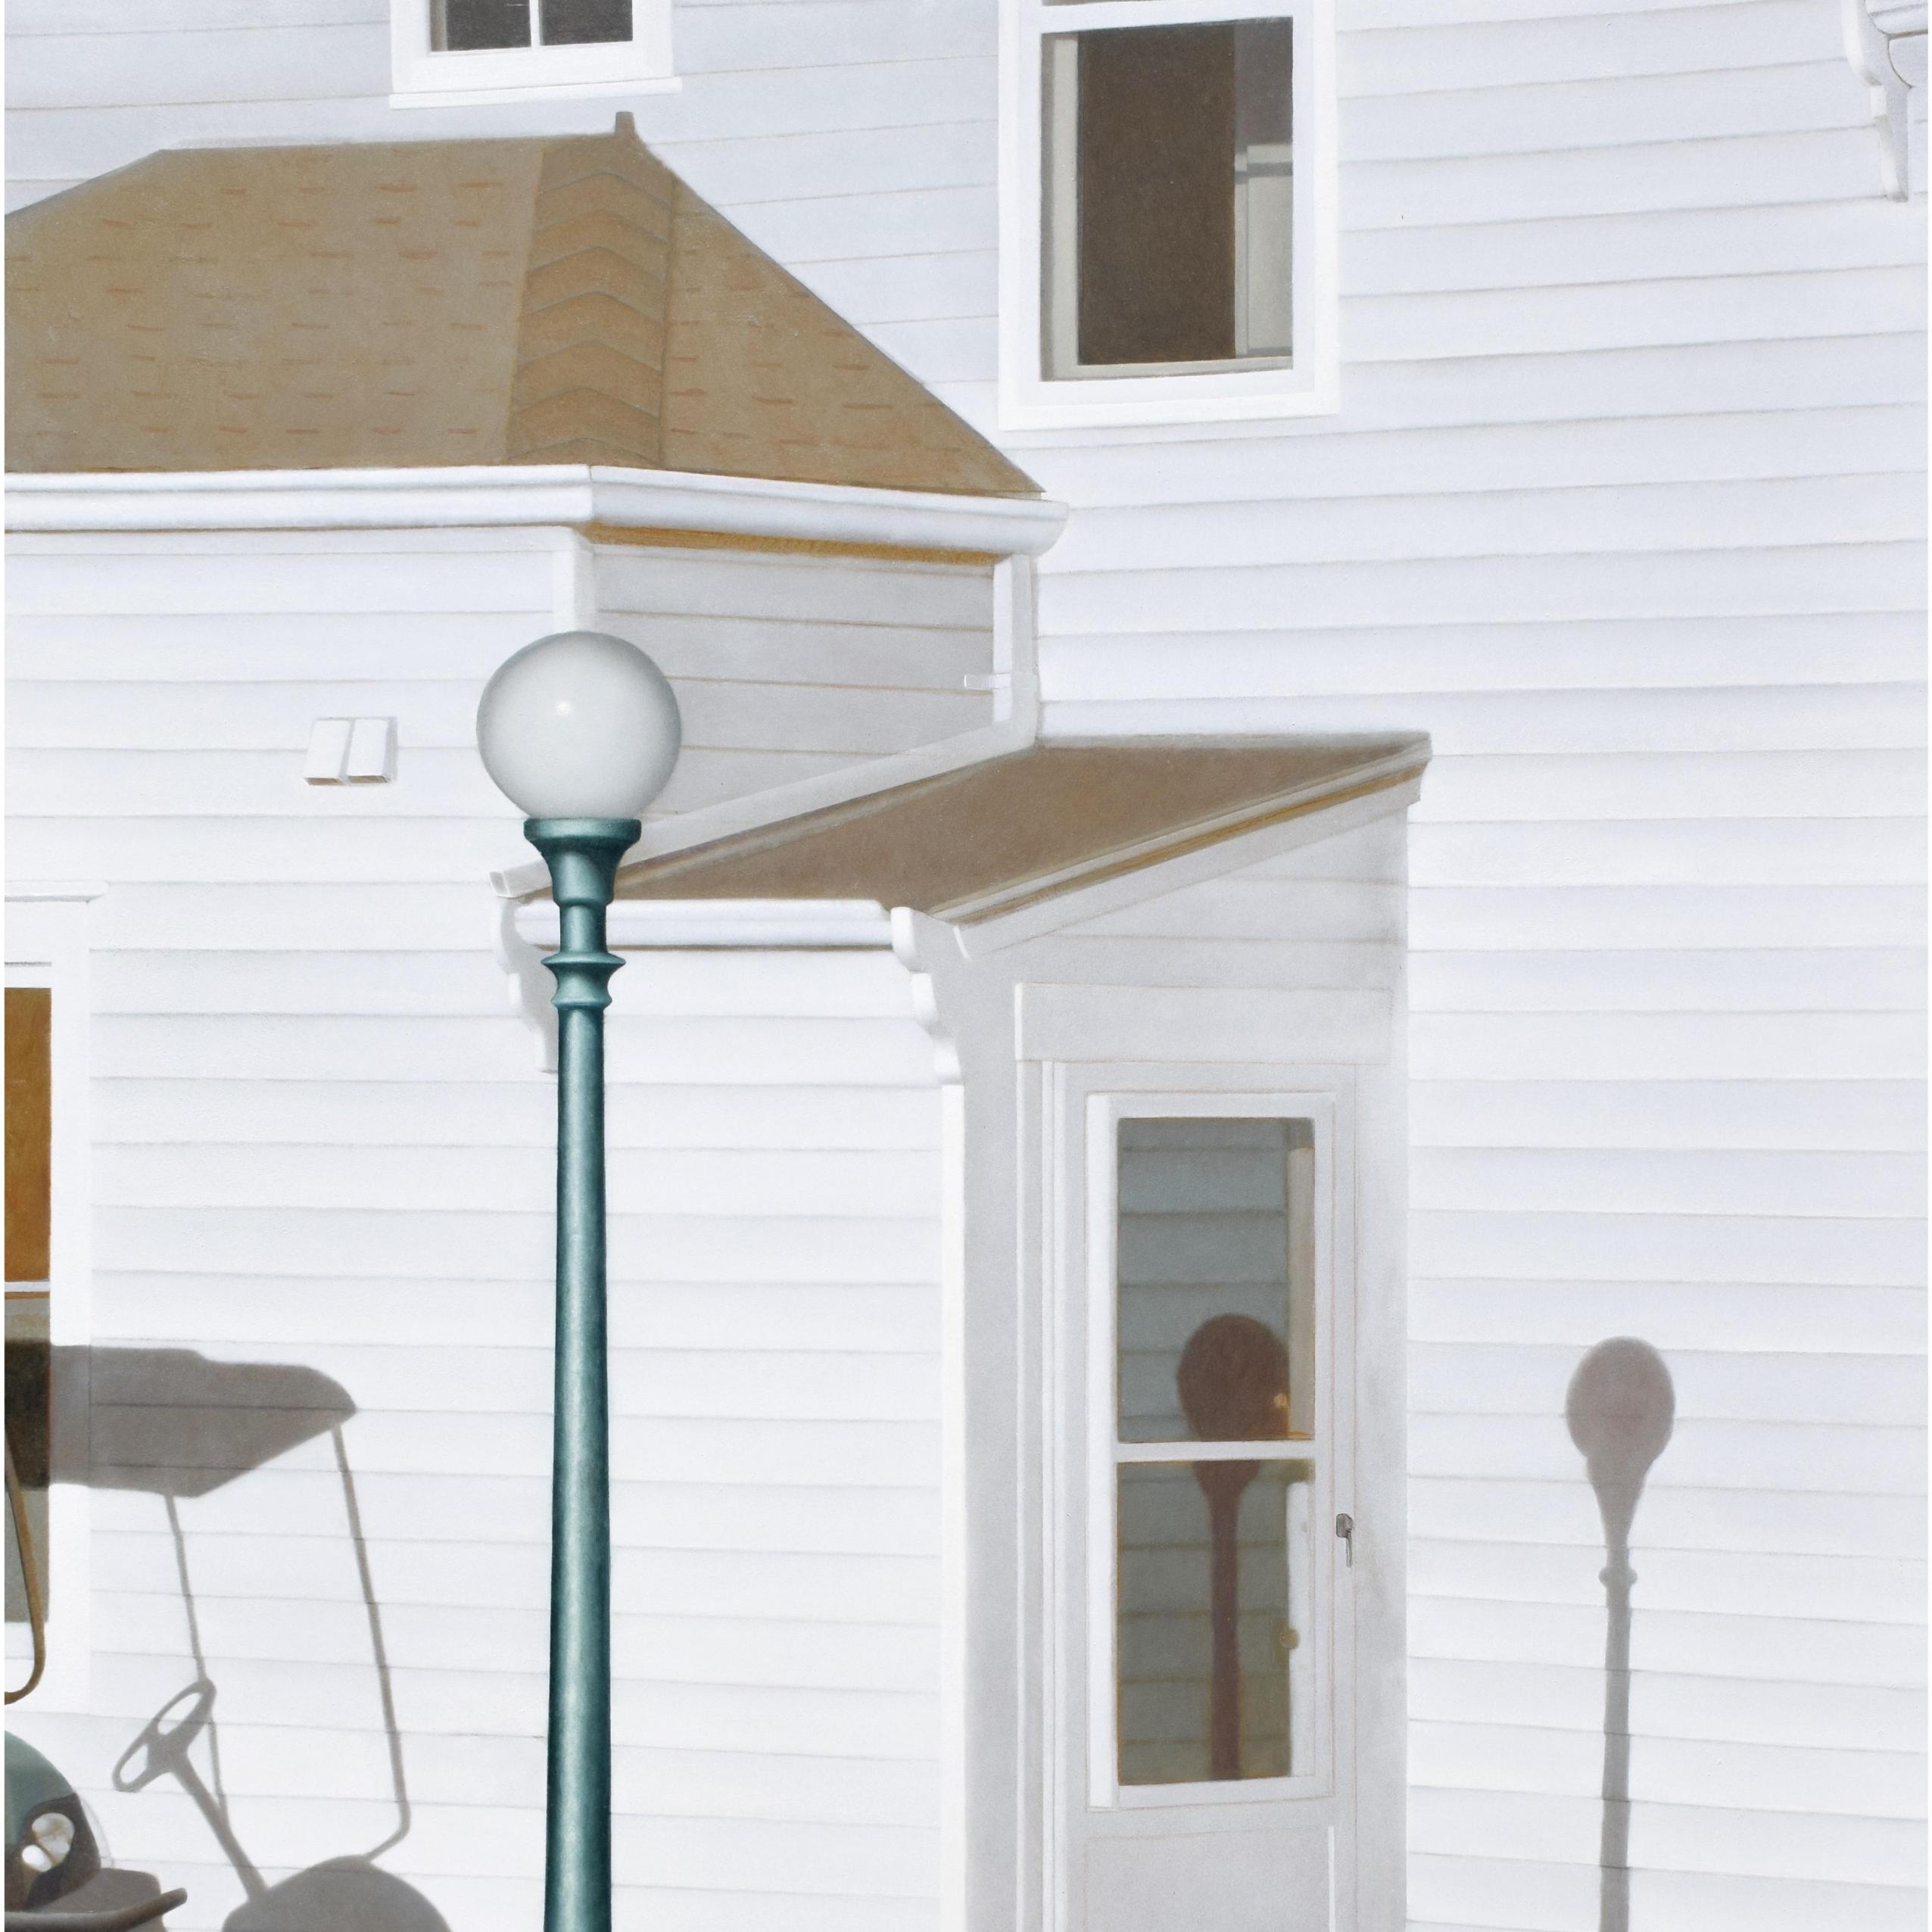 Baumgarten, Lamp Post with Shadow, 48 x 36 inches, oil on panel